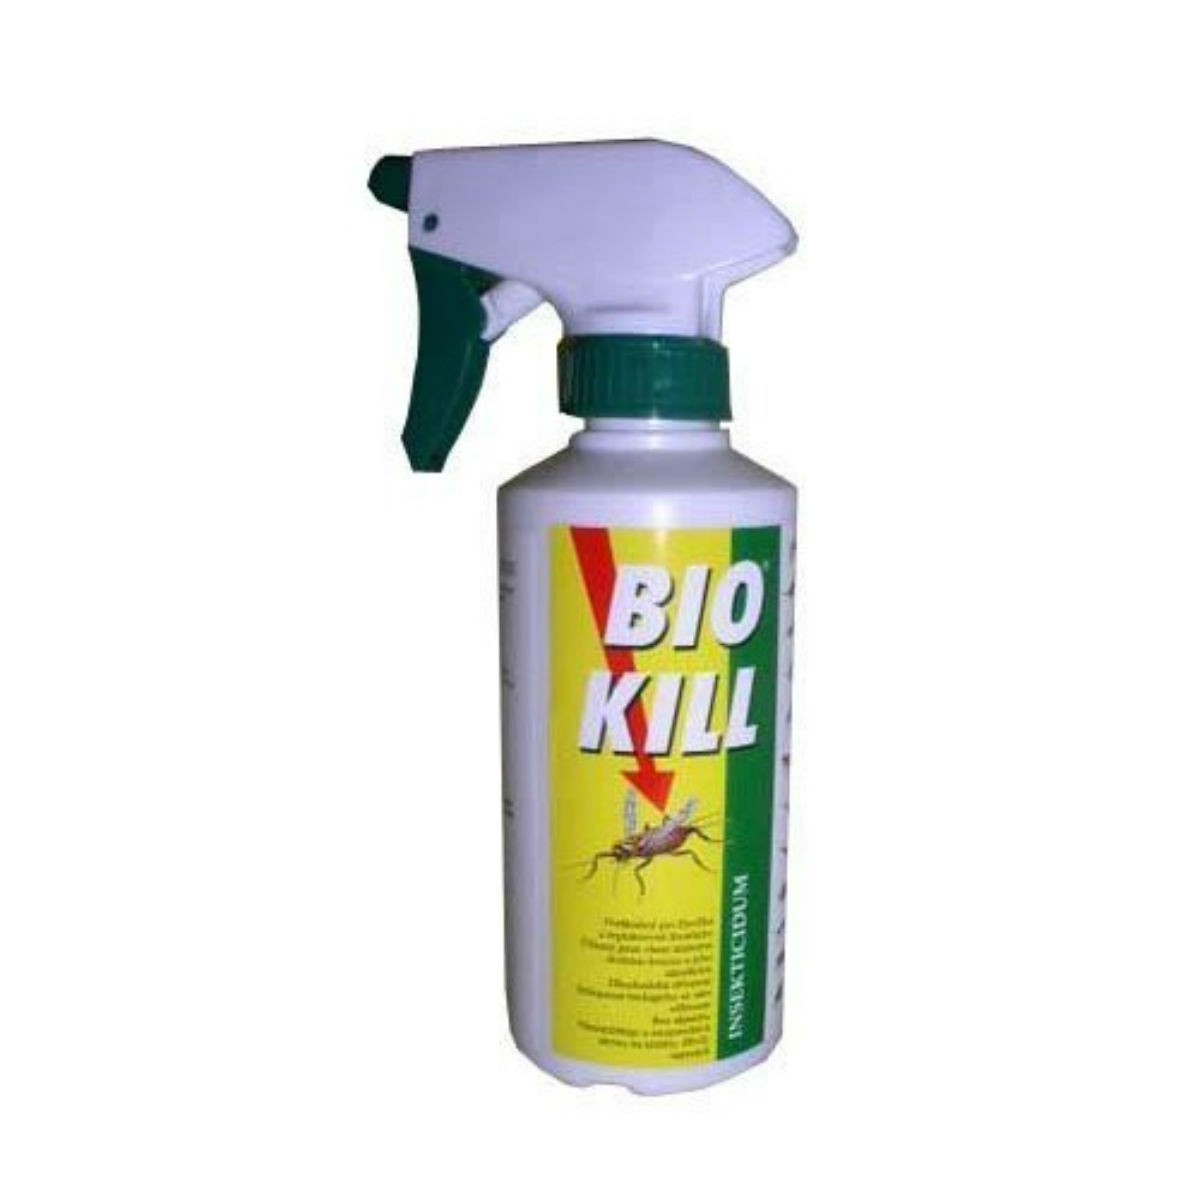 Bio Kill 450ml (exclusively for the environment)